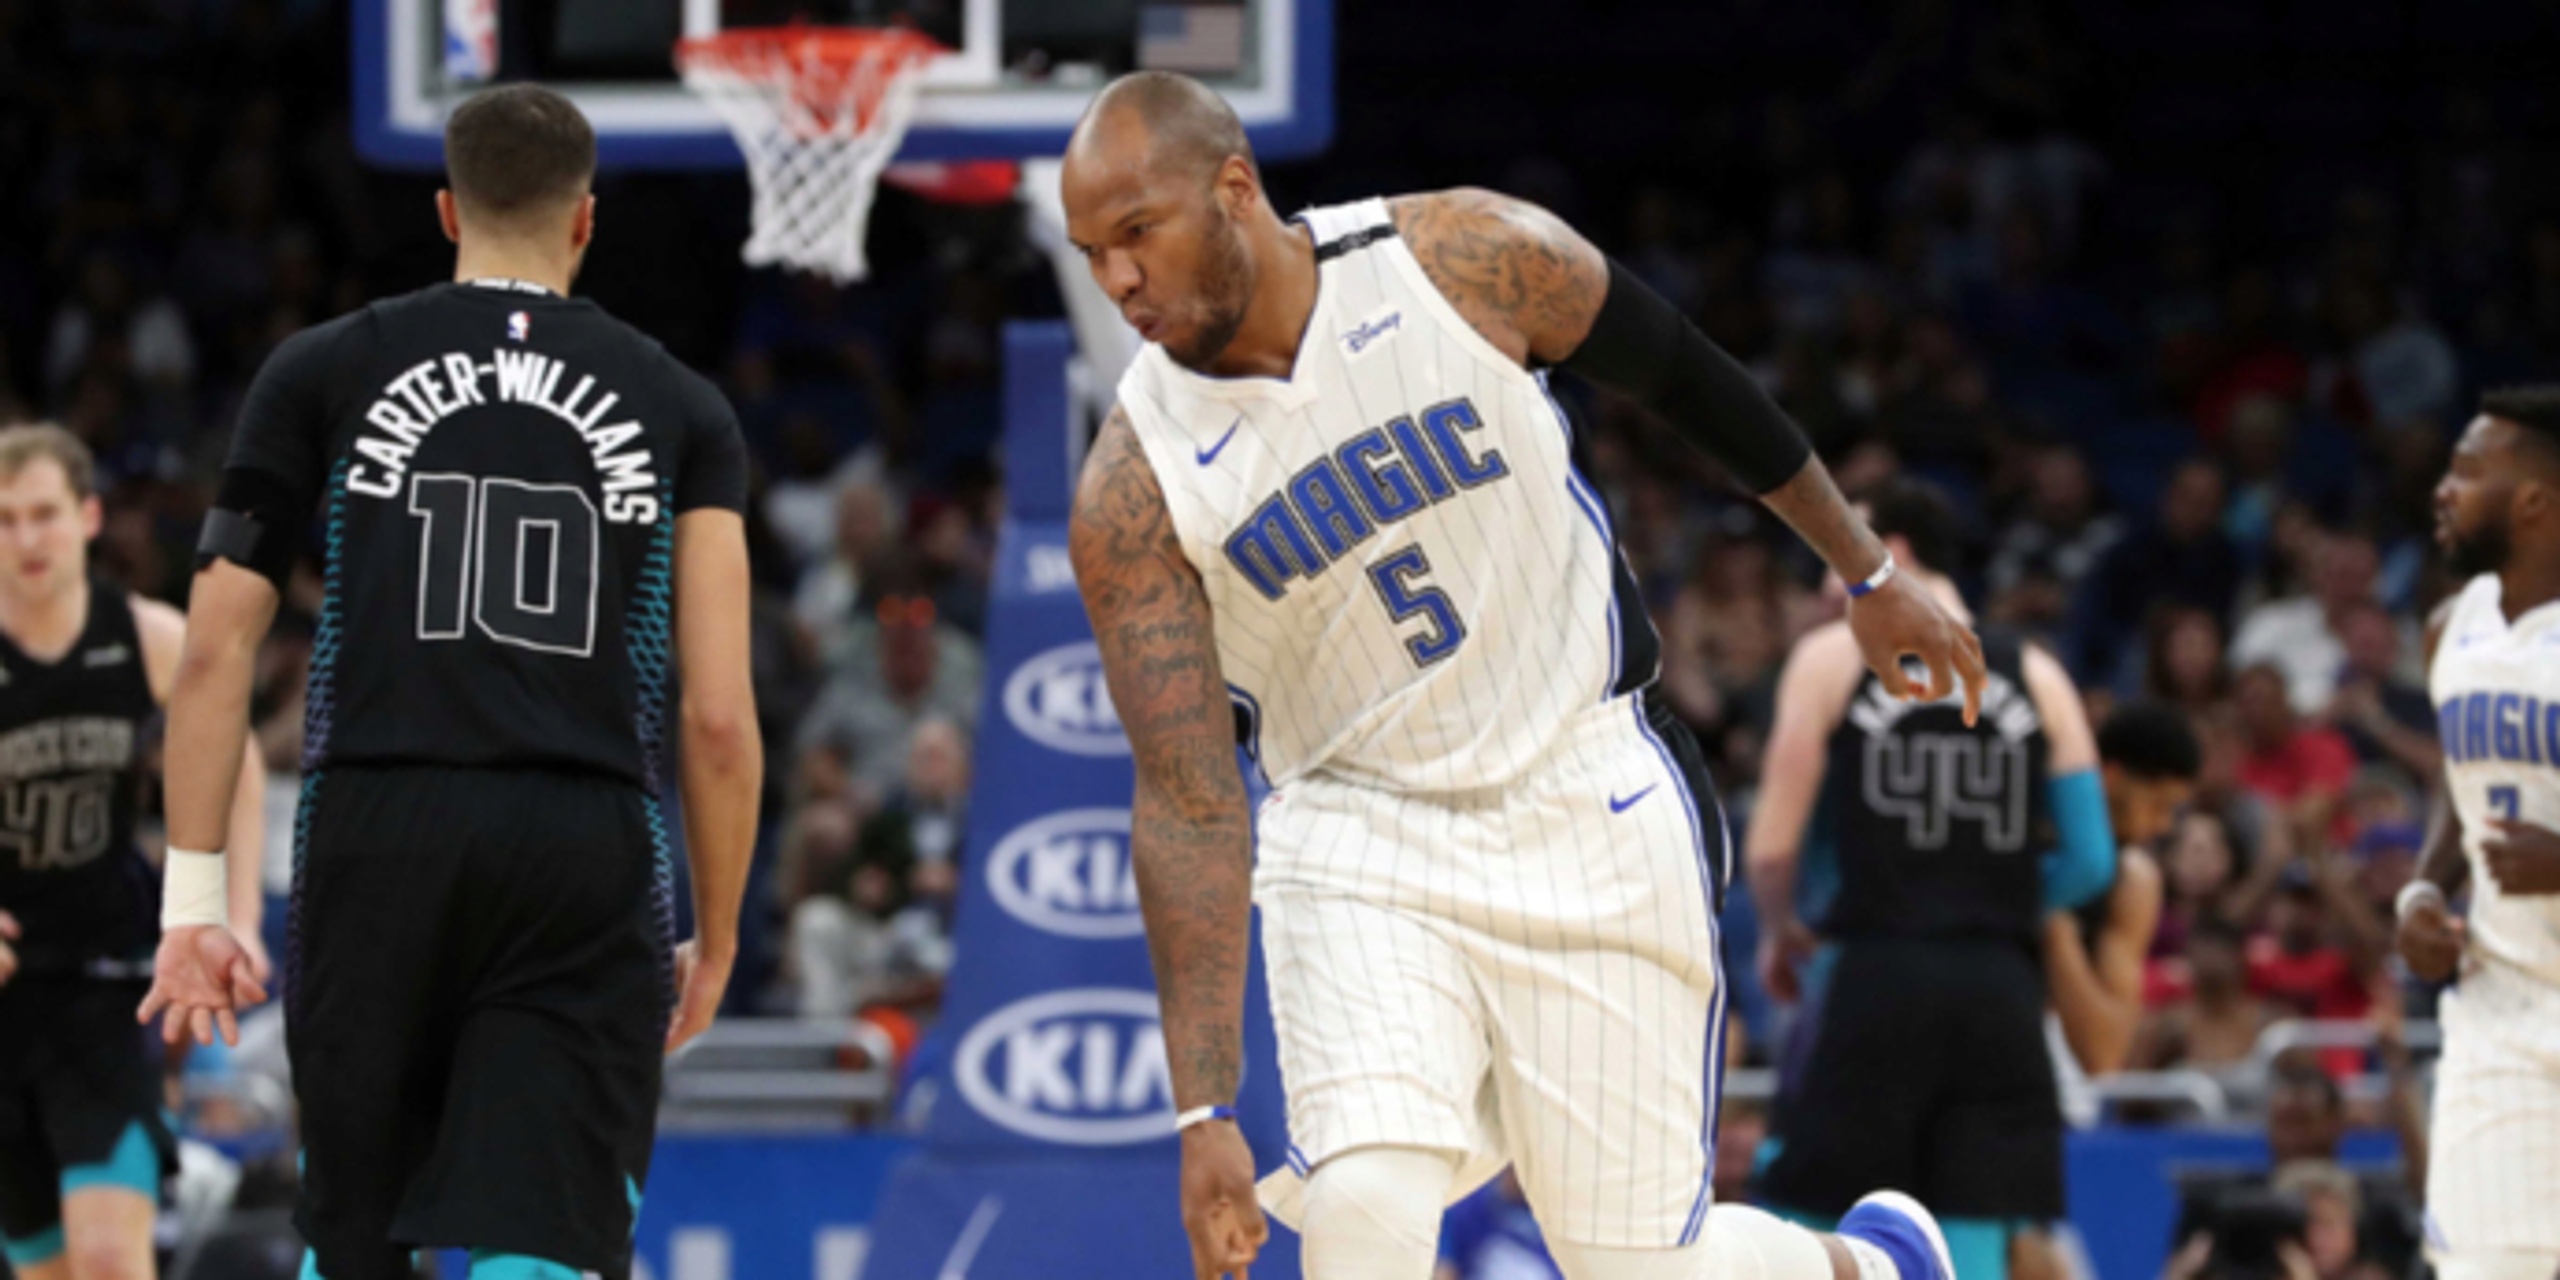 Marreese Speights re-signs deal in China